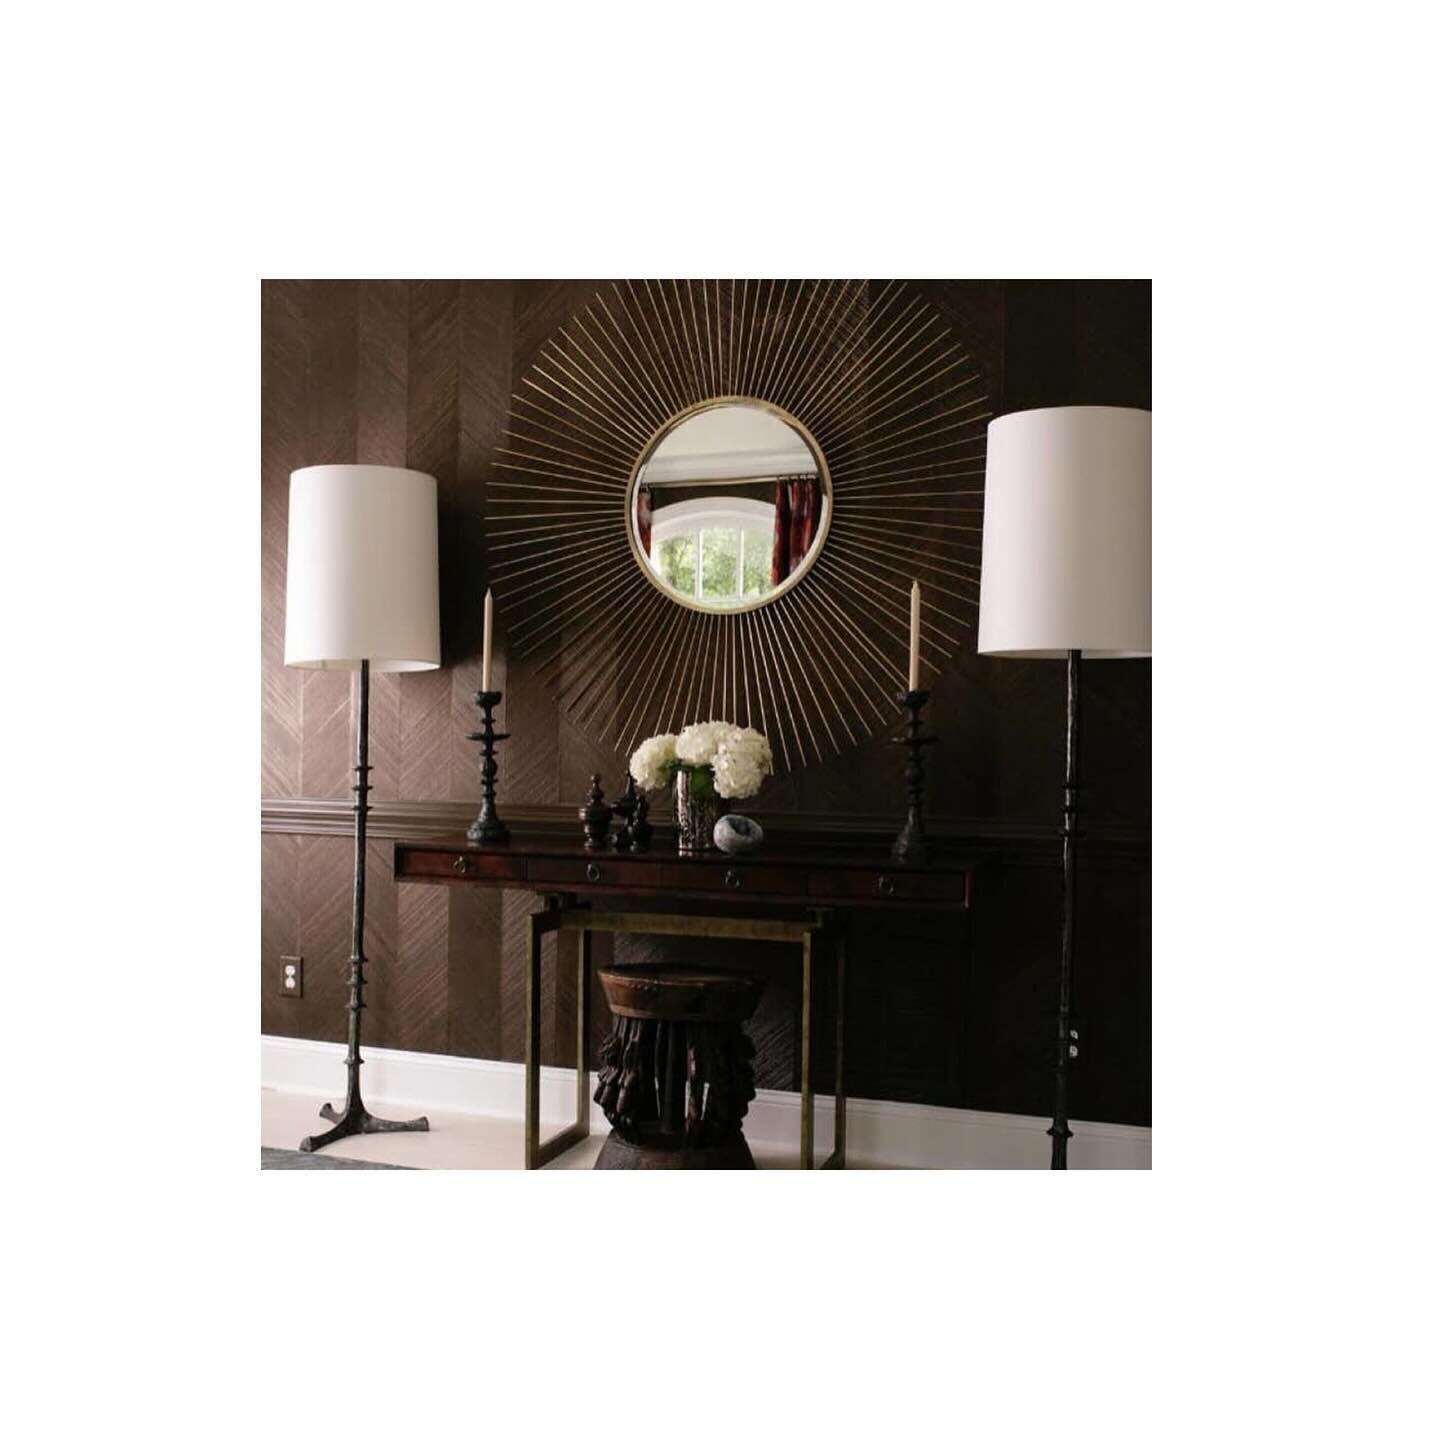 SSDC spot light on @oly.studio and their Fiona mirror in this exquisitely designed room designed by @hgarrettdesign. Contact us about our trade resources including the beautiful lighting and mirrors from Oly.